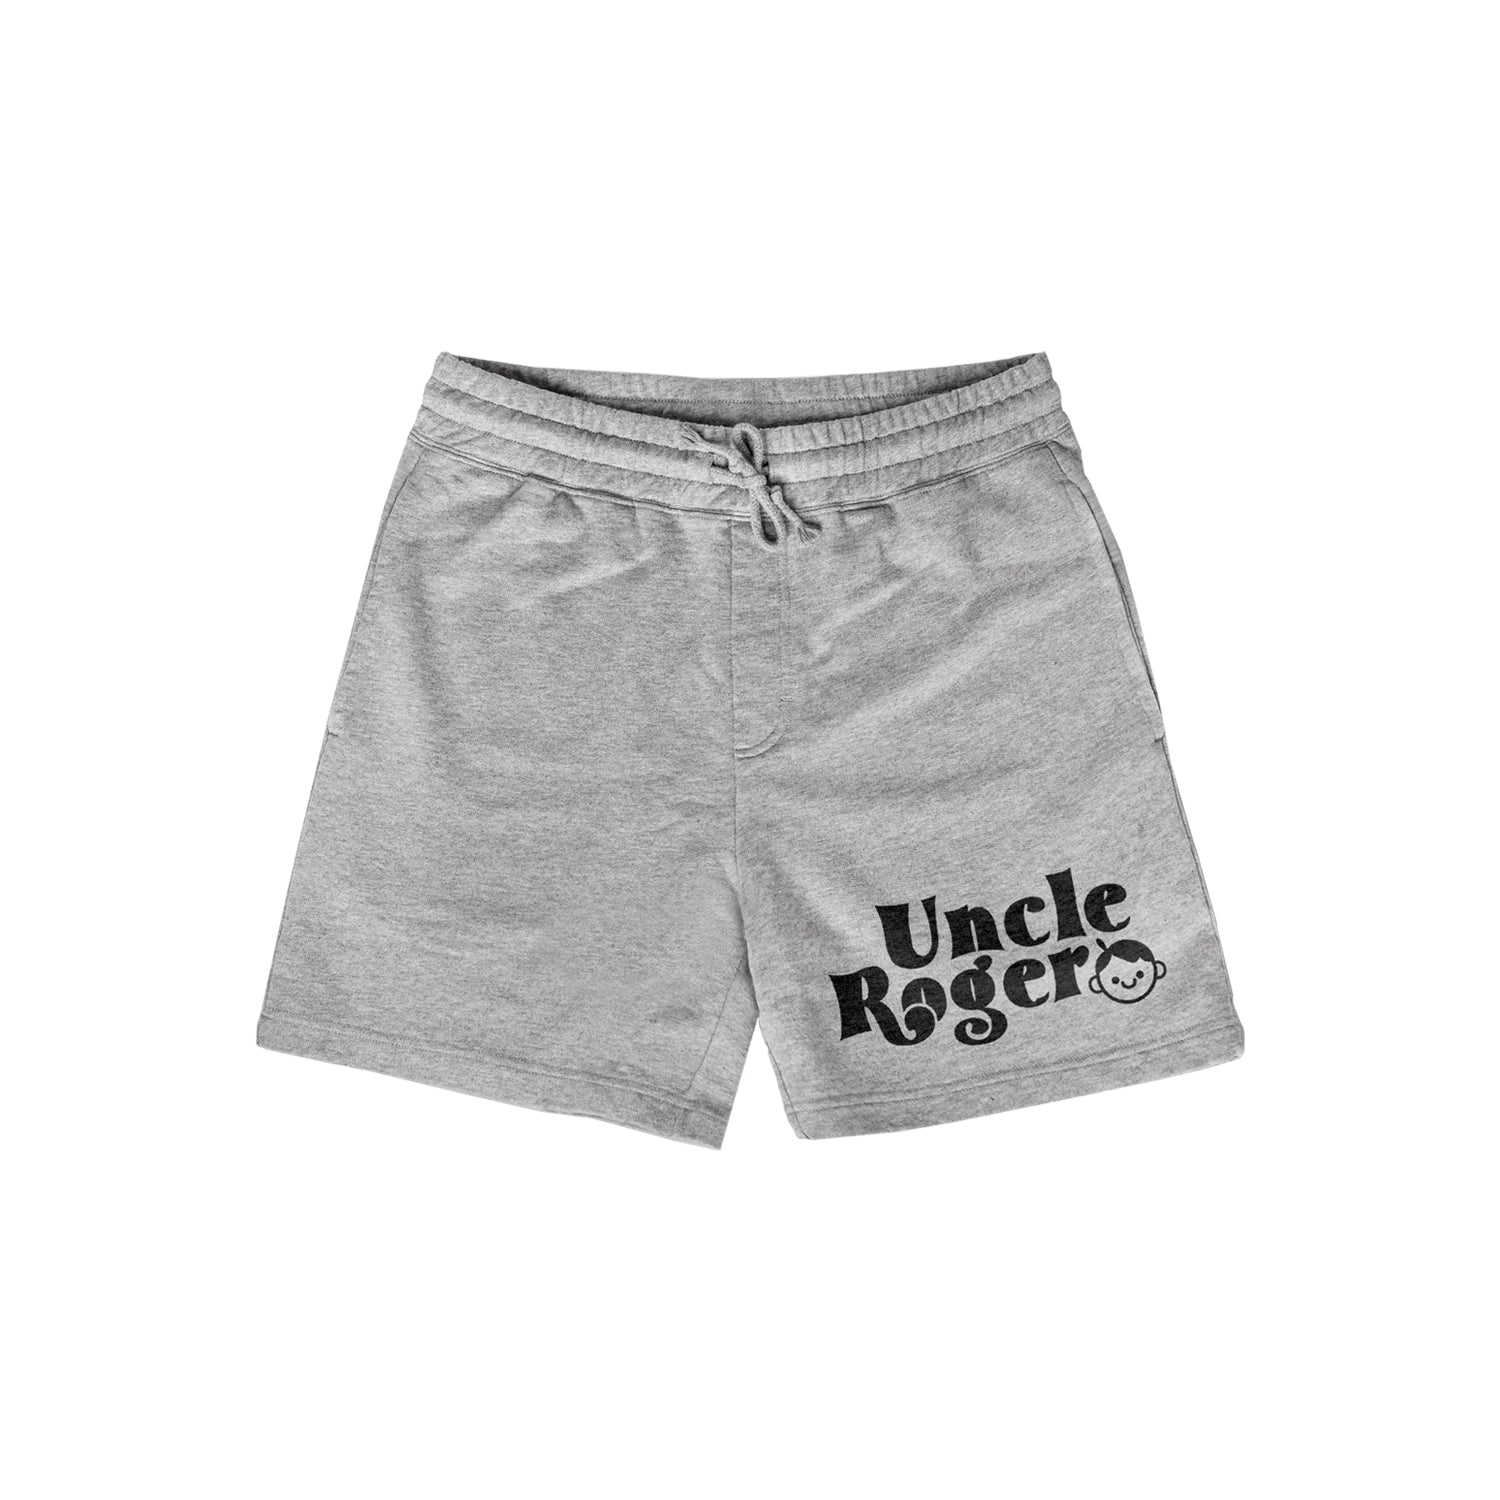 Uncle Roger Grey Sweat Shorts